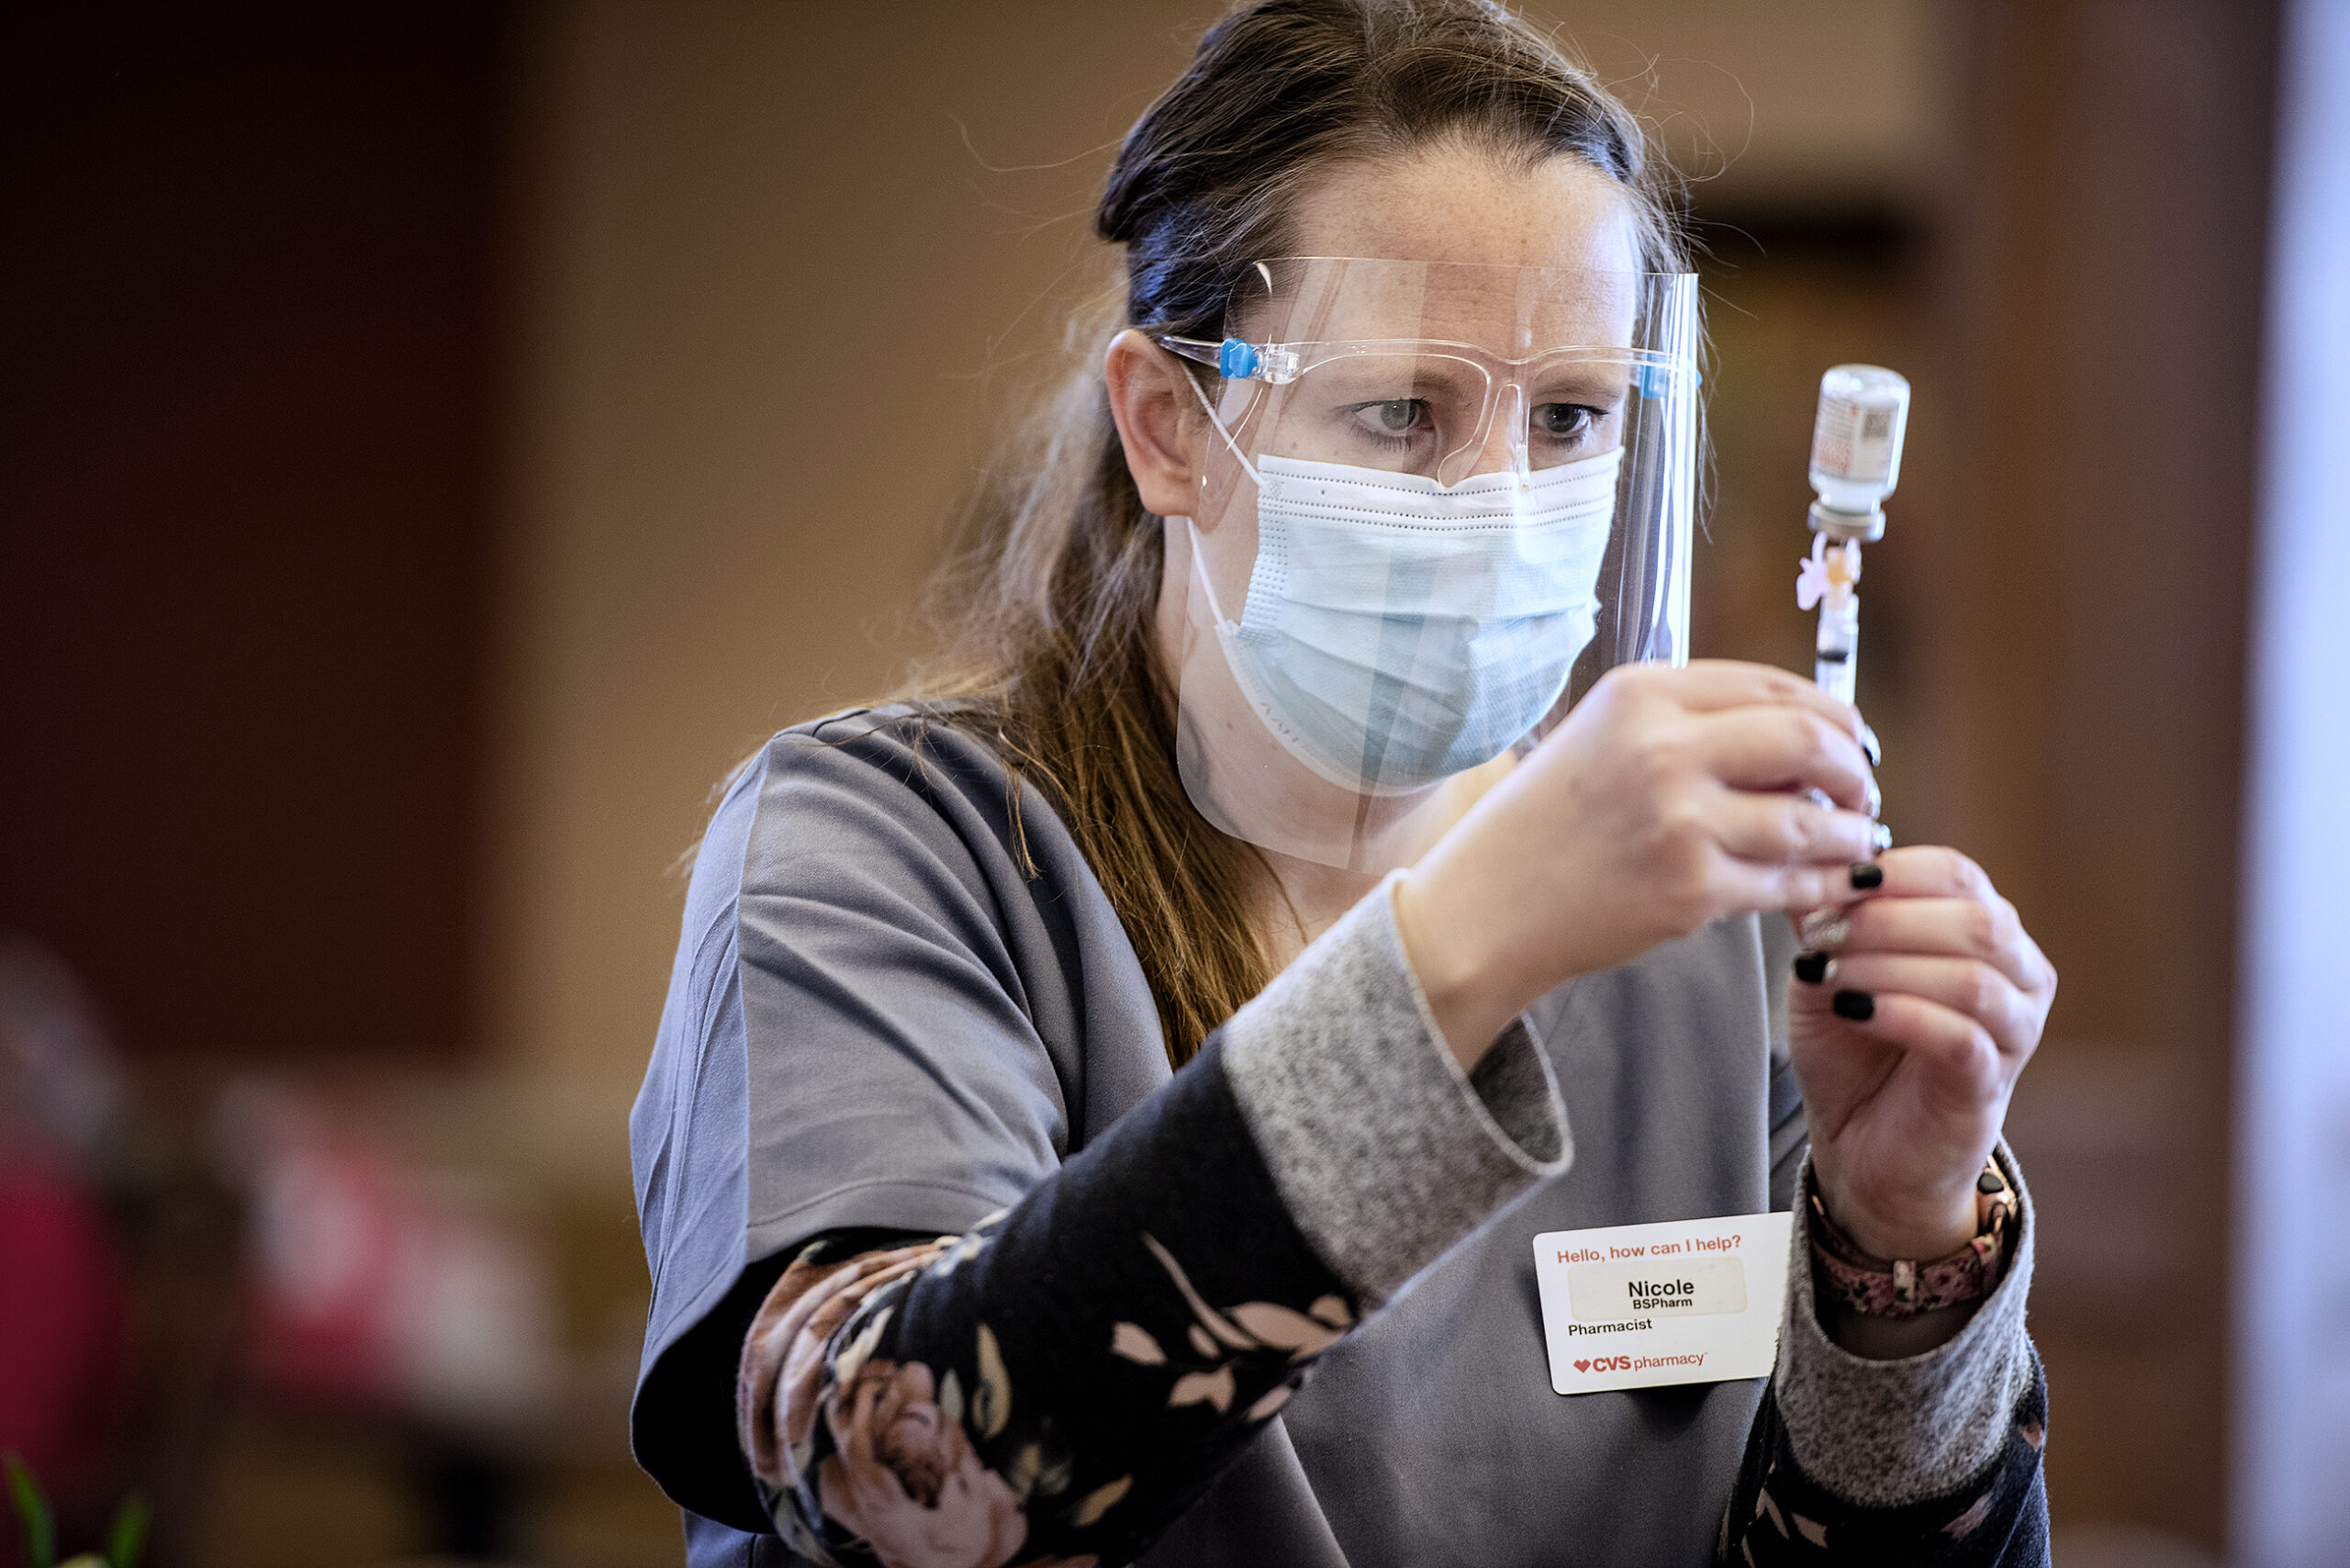 A pharmacist in gray scrubs and a face shield looks closely at a vial as she draws up a vaccine